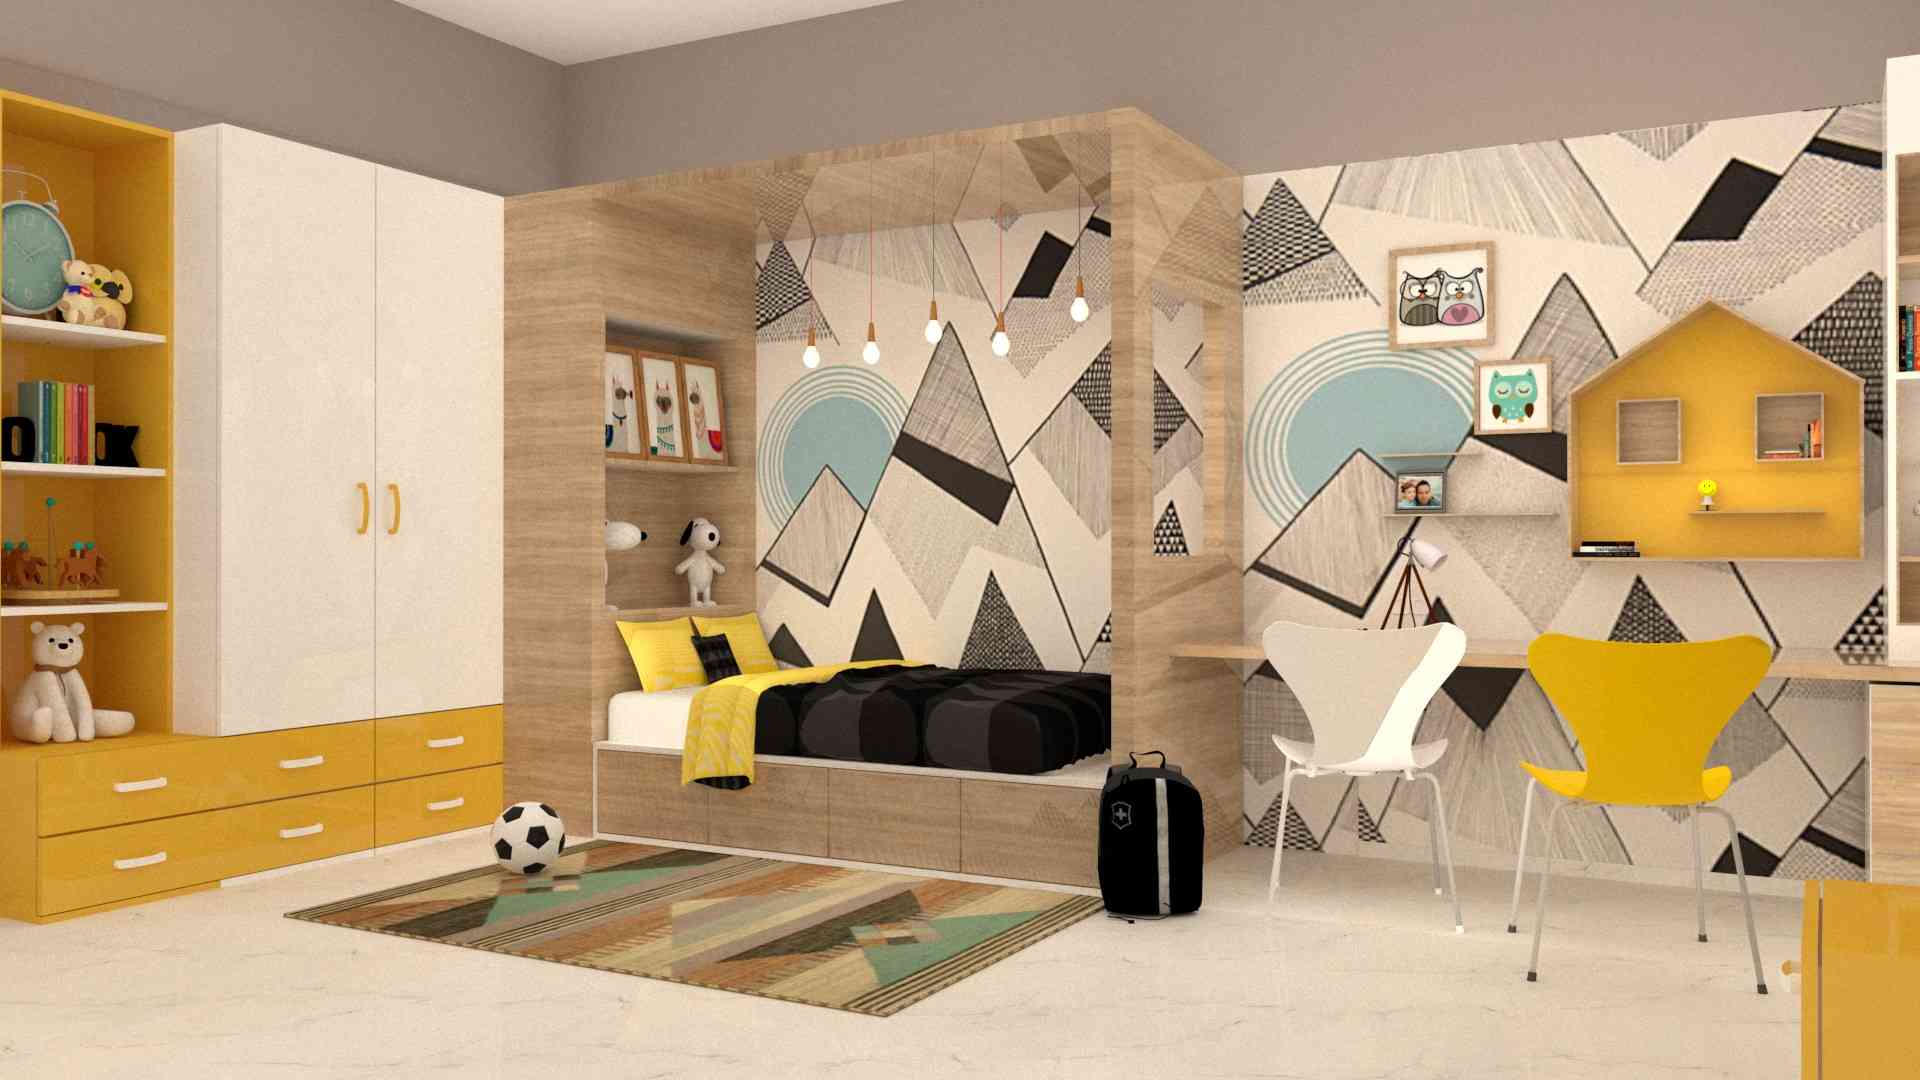 Refreshing Accent Wall Ideas For Kids’ Room